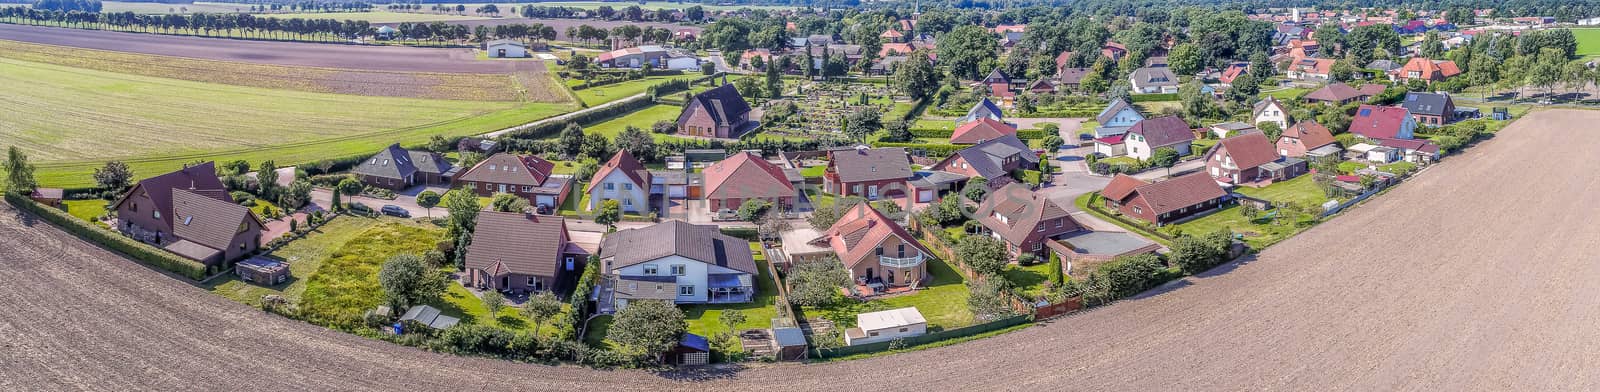 Stiched panorama of a small village in Germany, aerial view